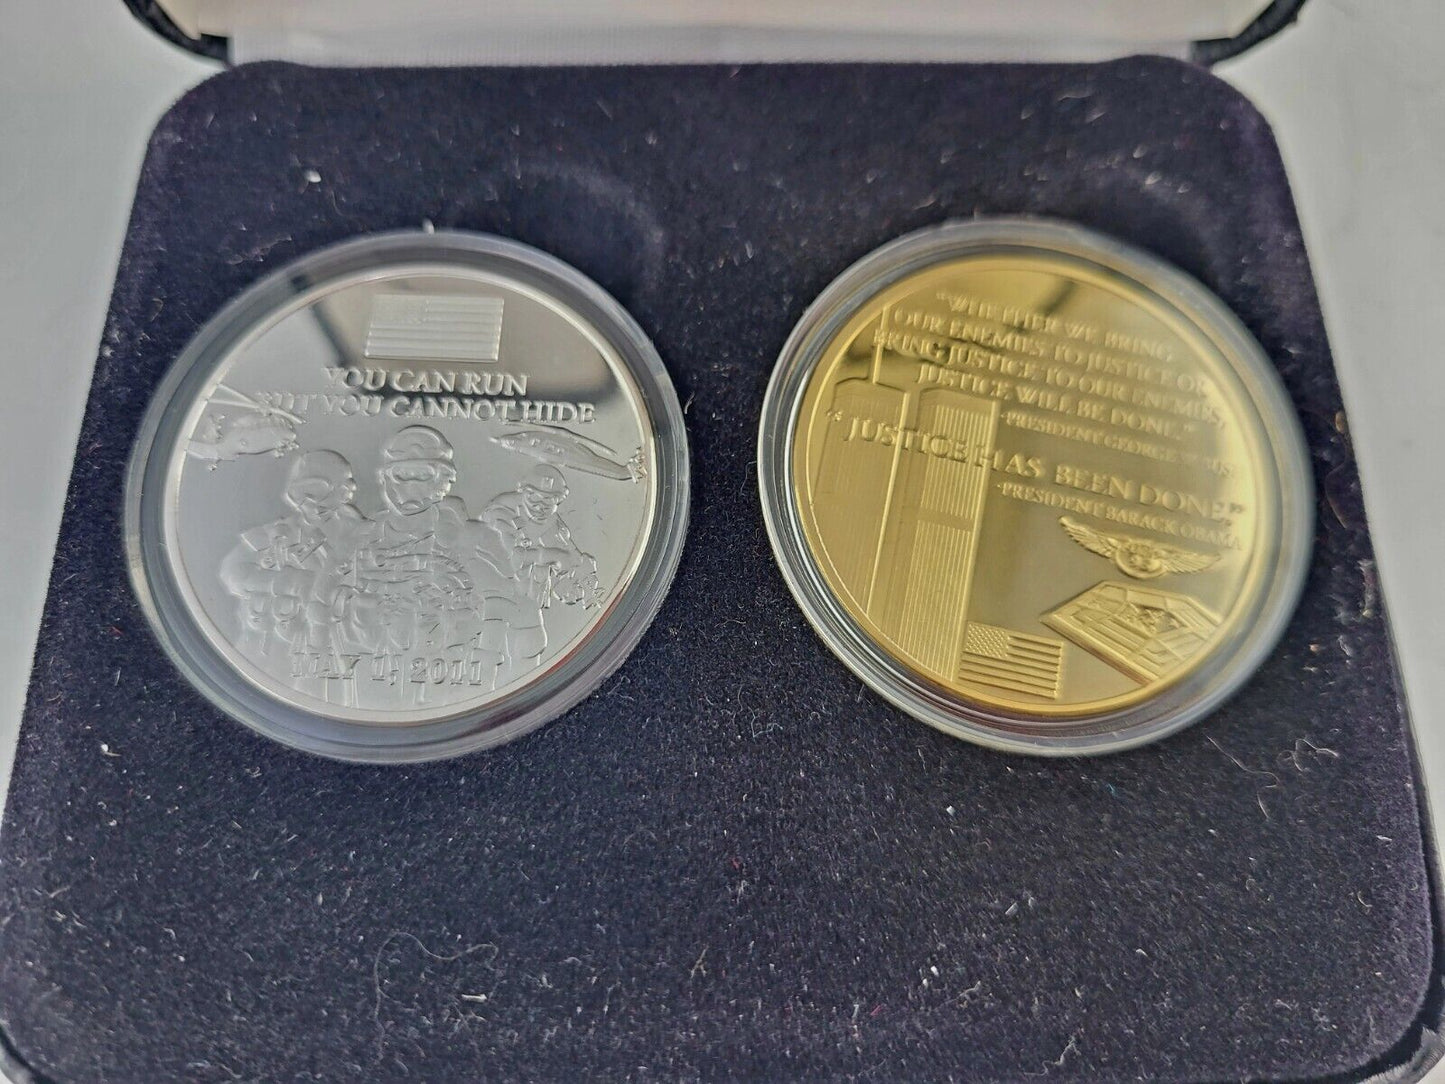 2011 "You Can Run But You Cant Hide" 2pc. Plated Silver & Gold Medal Set